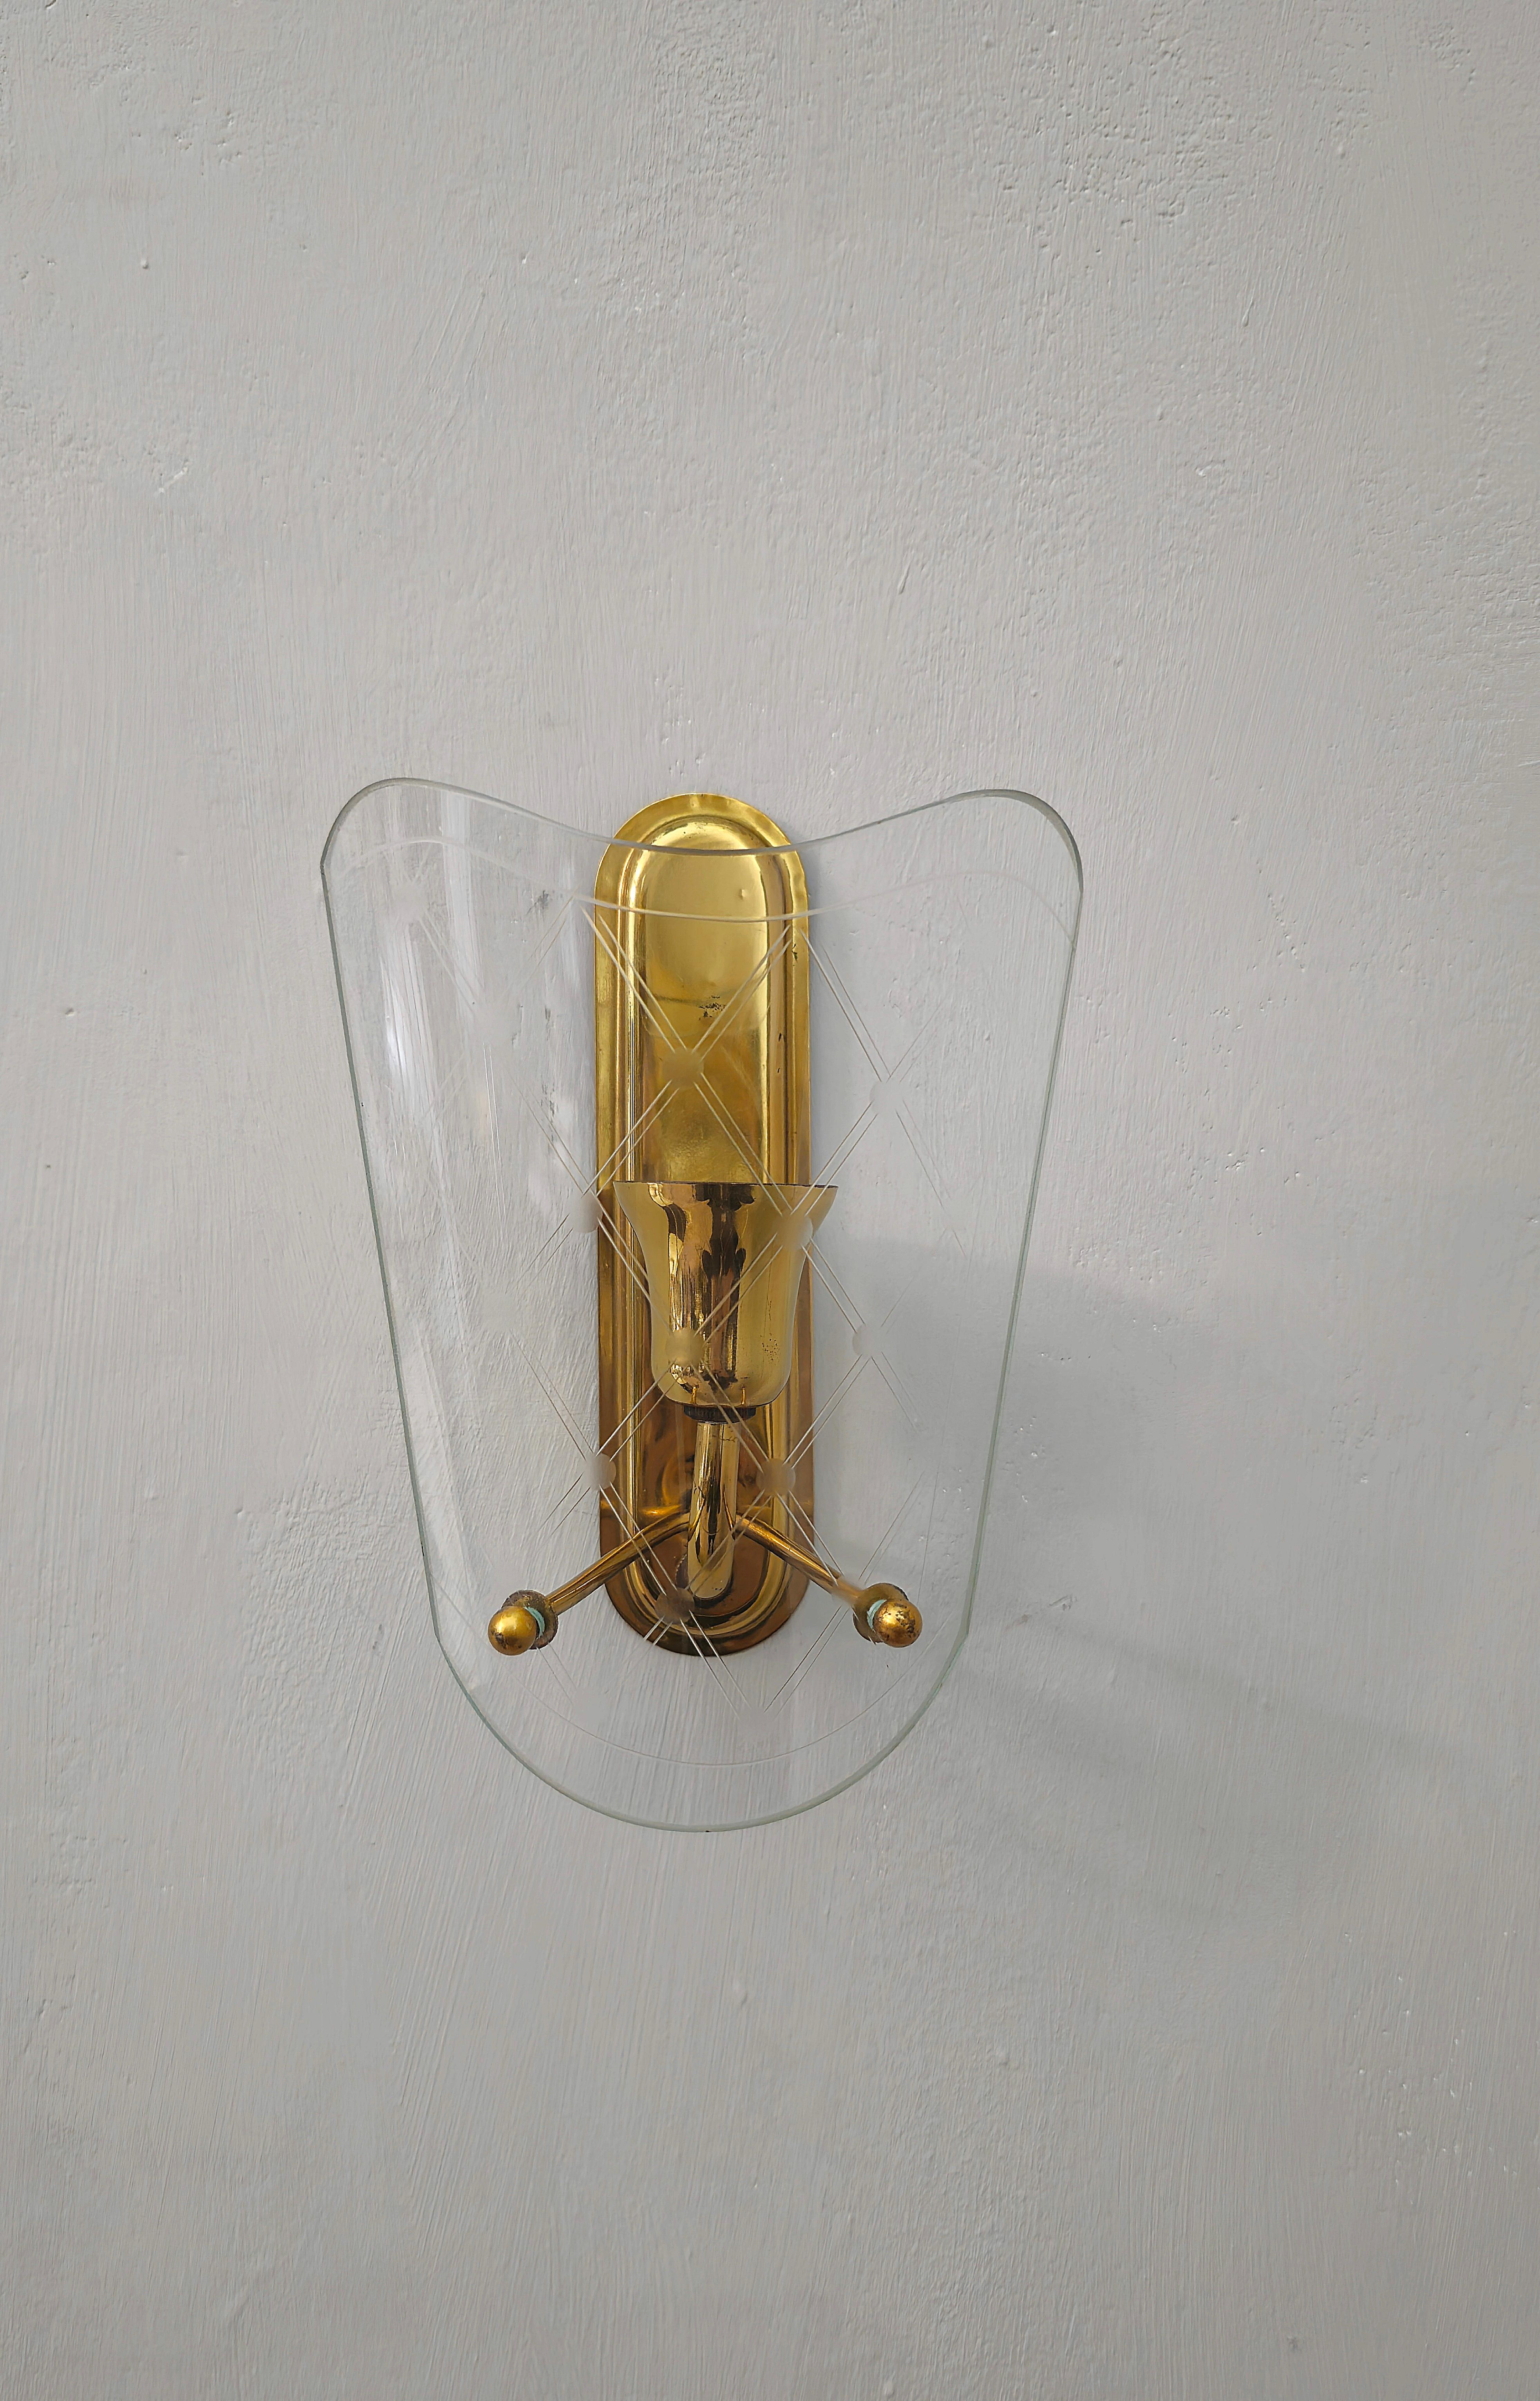 Pair of Wall Lights Sconces Brass Decorated Glass Midcentury Italian Design 1950 4